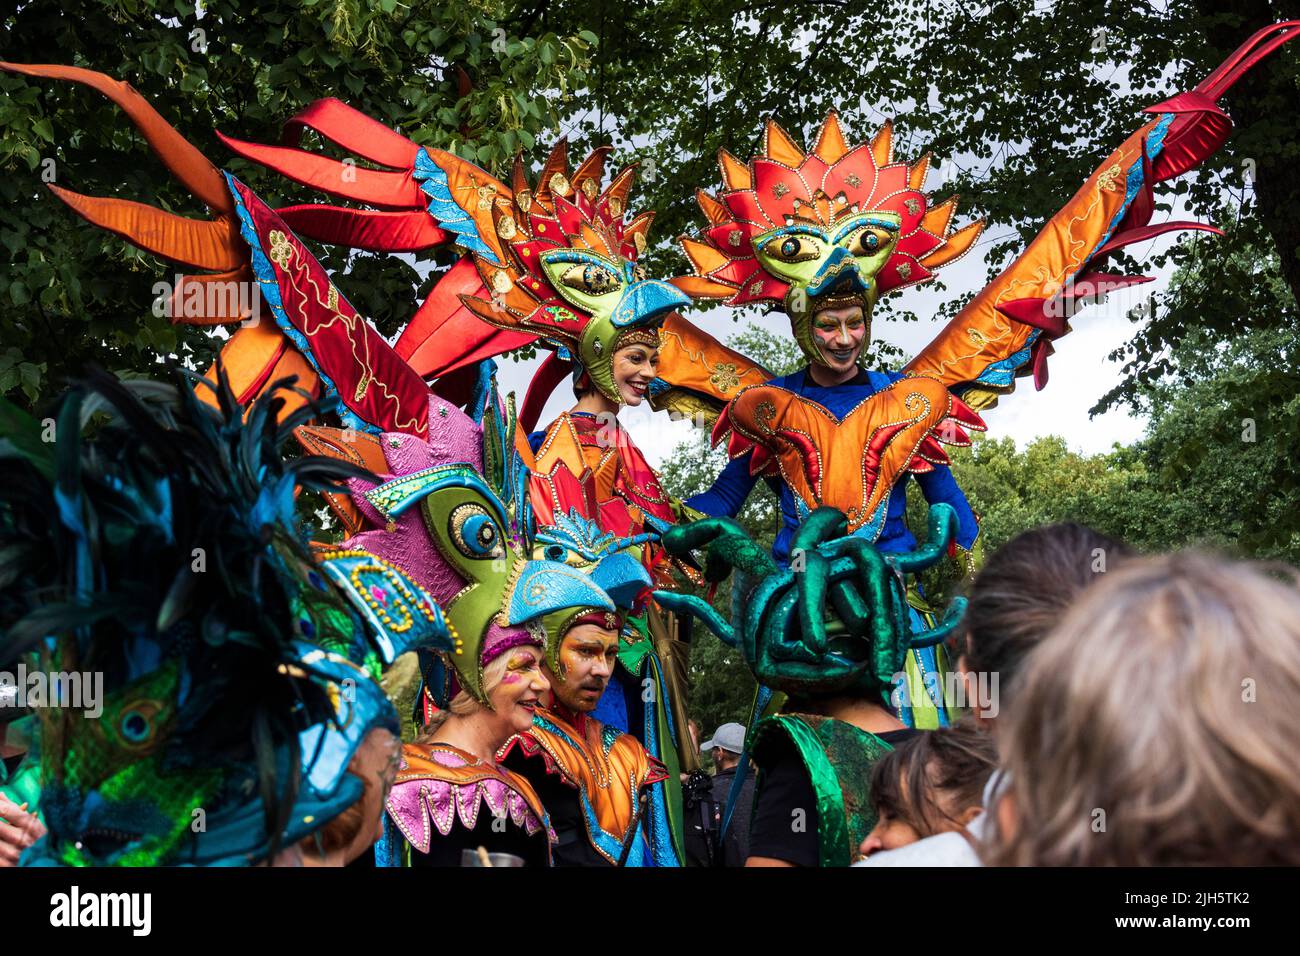 Bremen carnival with stilt walkers in colourful costumes, masks and samba rhythms, Bremen, Germany, Europe Stock Photo